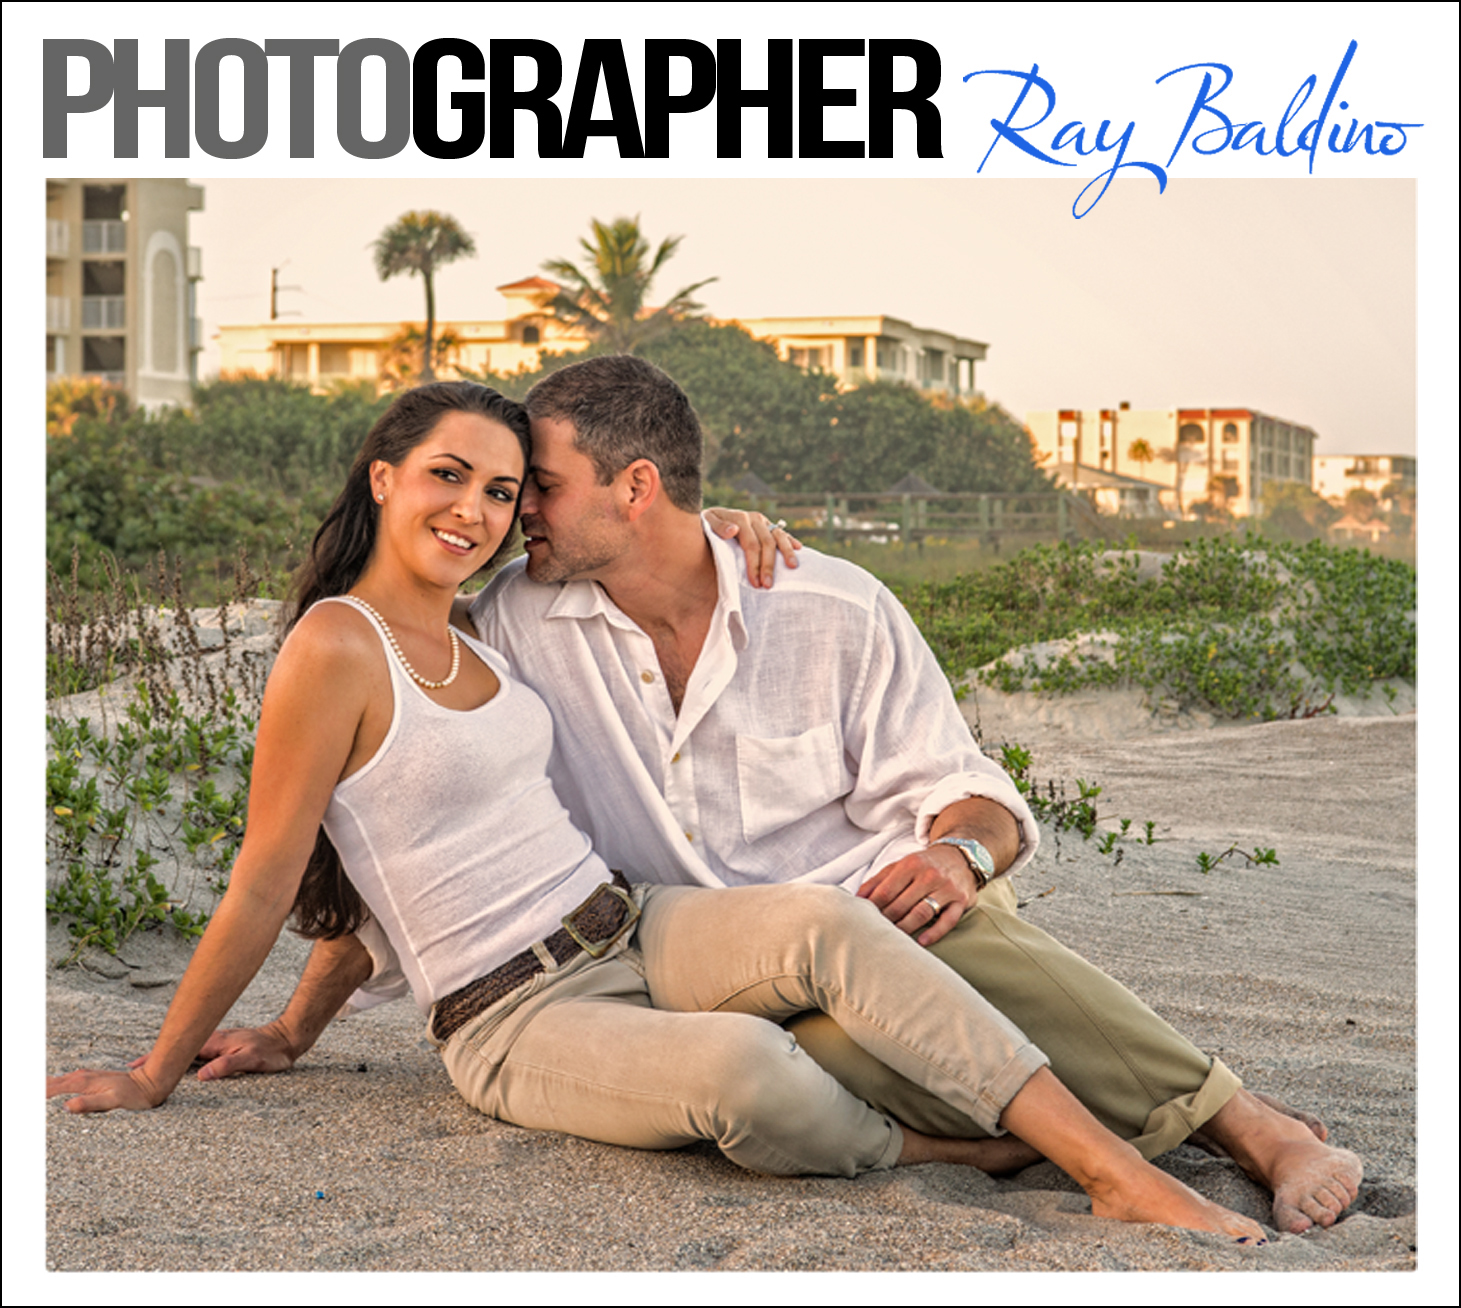 famiily-beach-photography-in-cocoa-beach-florida-by-ray-baldino-this-image-is-of-a-husband-and-wife-sitting-on-the-sand-in-the-sunset-happy-couple